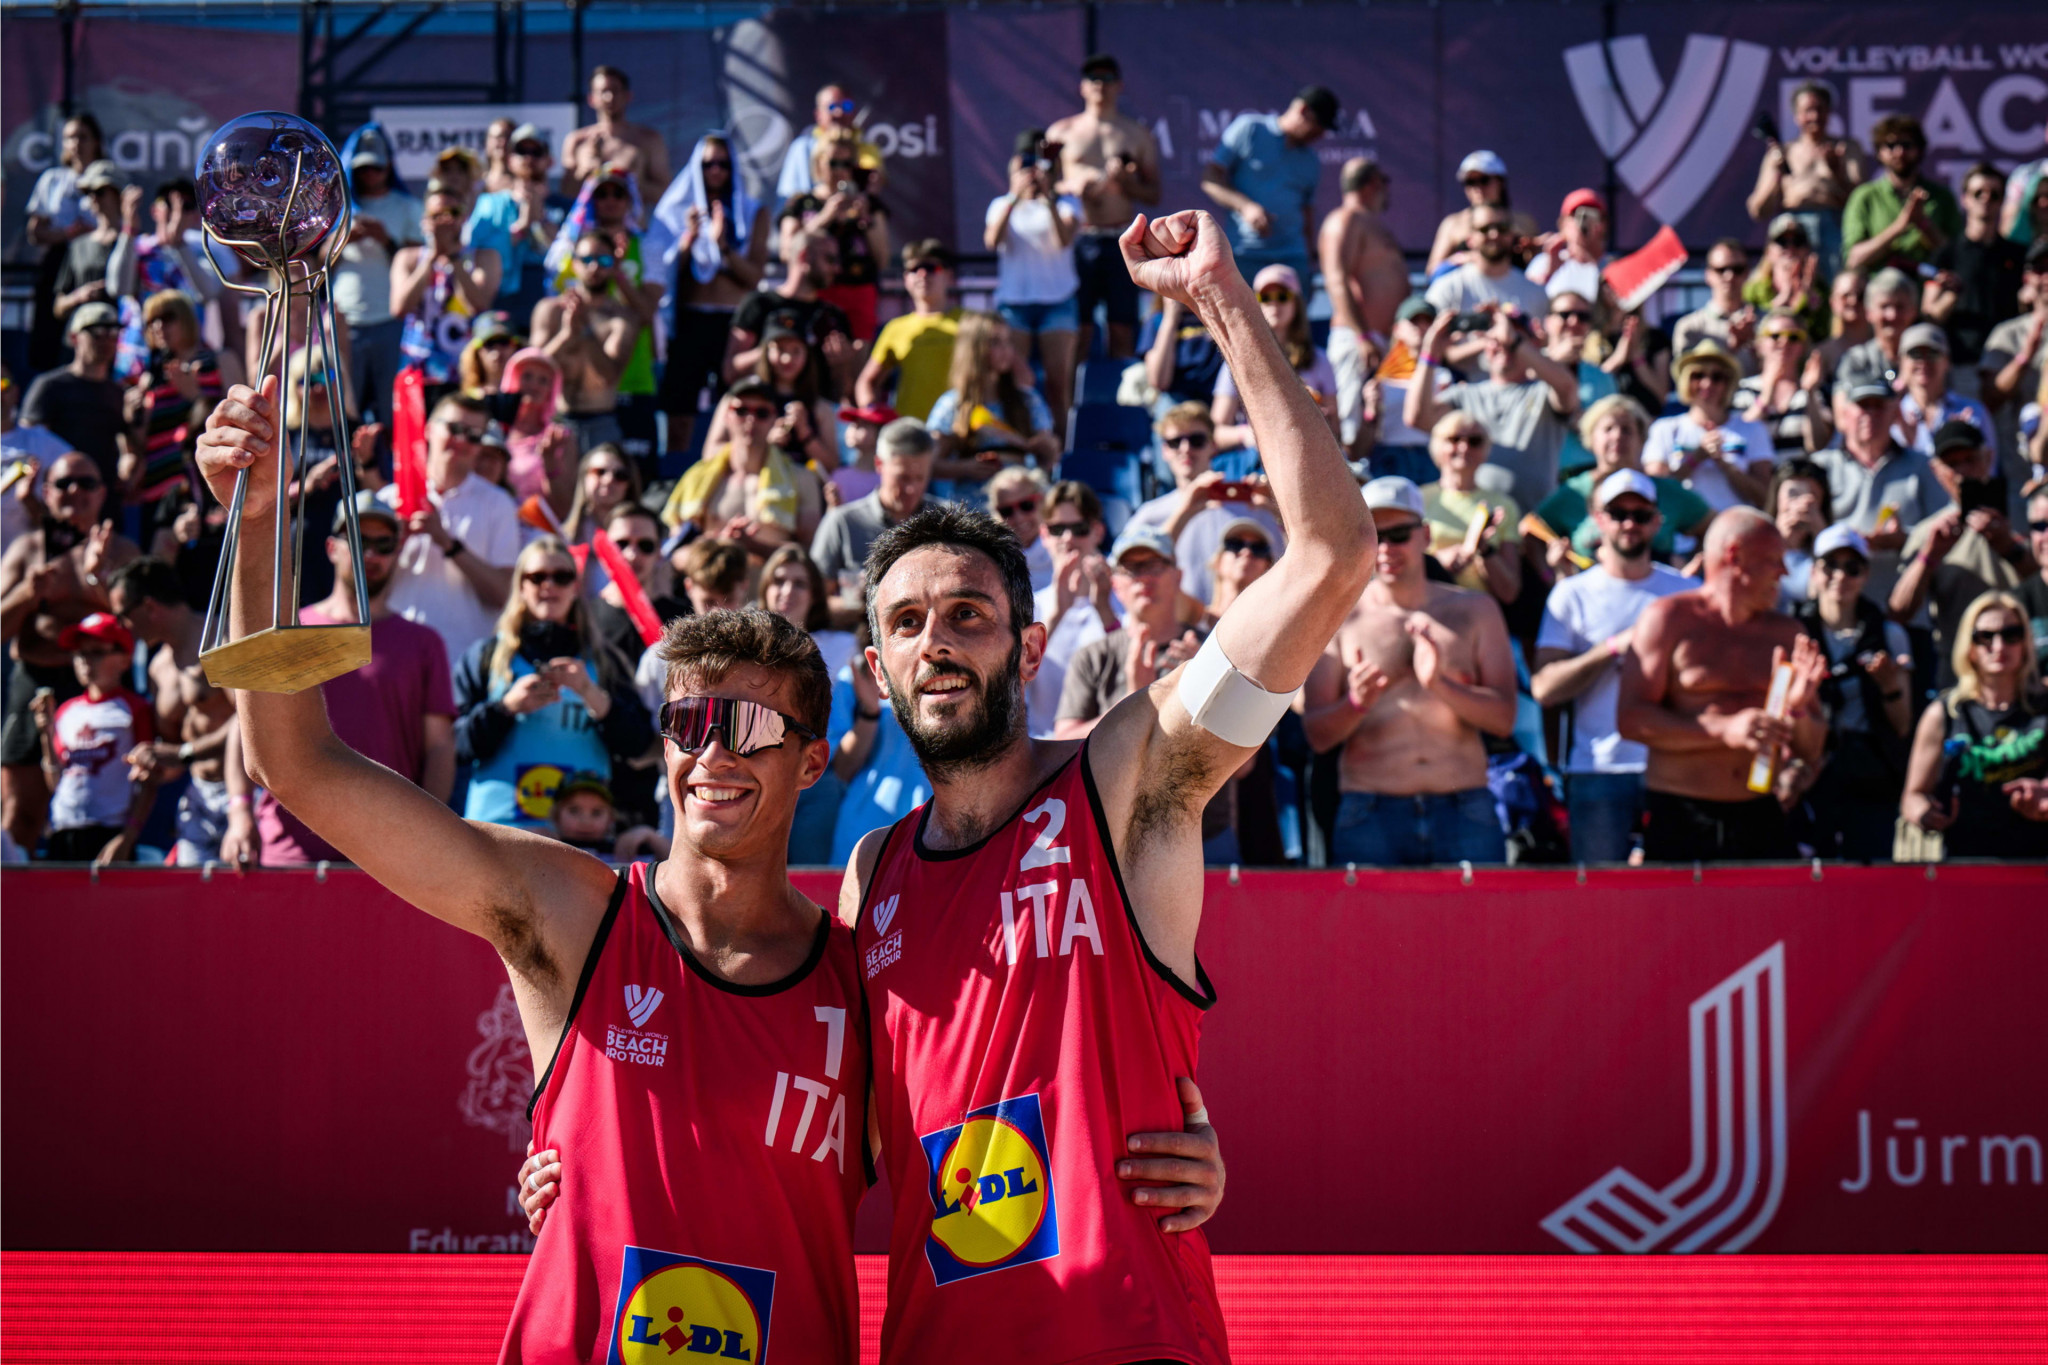 Paolo Nicolai and Samuele Cottafava overcame Cherif Younousse and Ahmed Tijan to win the title ©Volleyball World